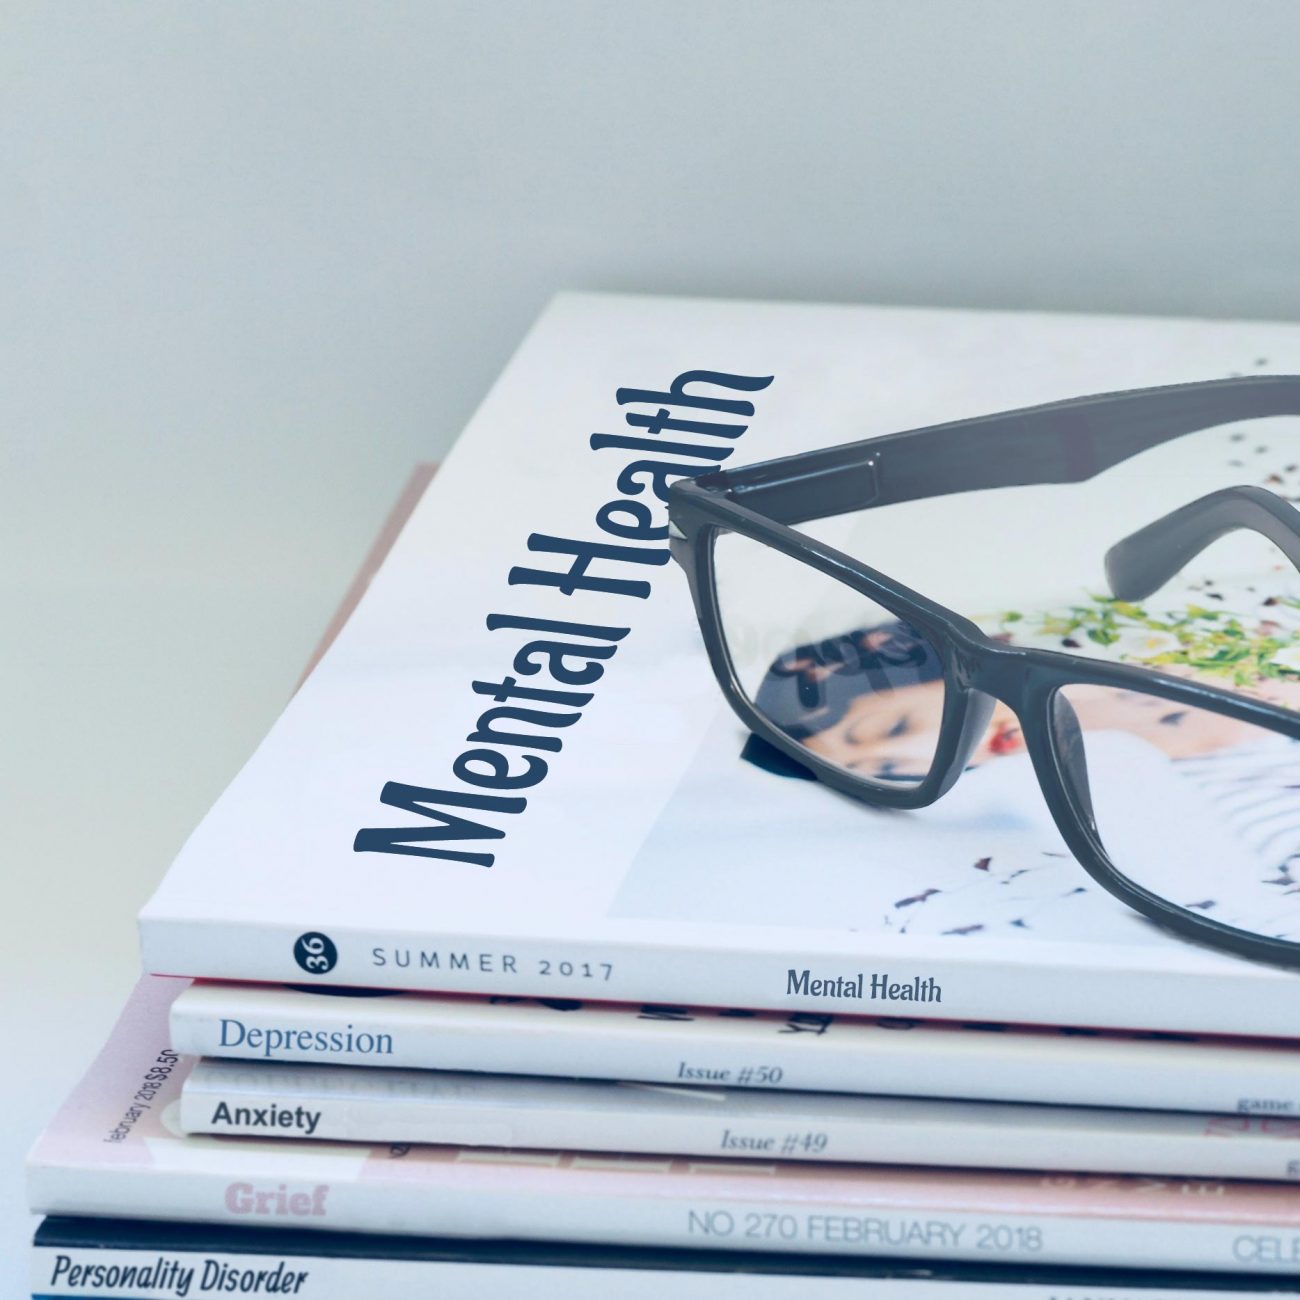 Stack of magazines focused on mental health topics with visible titles such as Mental Health, Depression, Anxiety, Grief, and Personality Disorder from issues dating Summer 2017 and February 2018, accompanied by a pair of black eyeglasses on top.